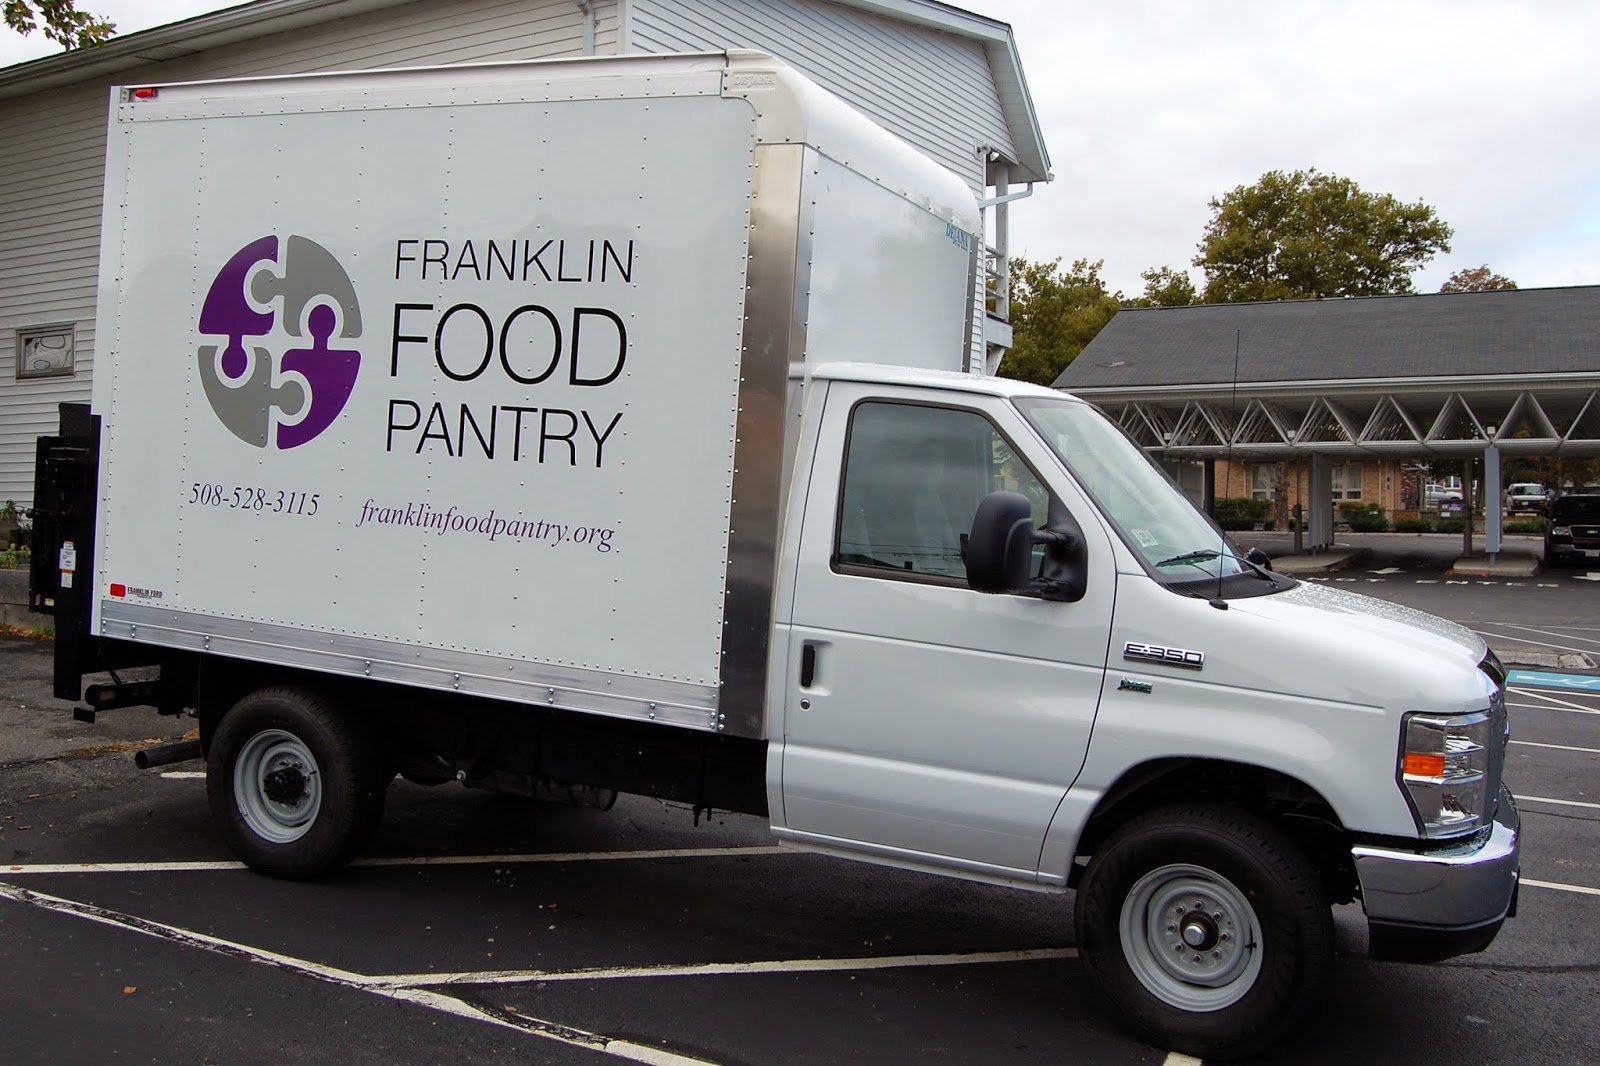 the Franklin Food Pantry's mobile pantry